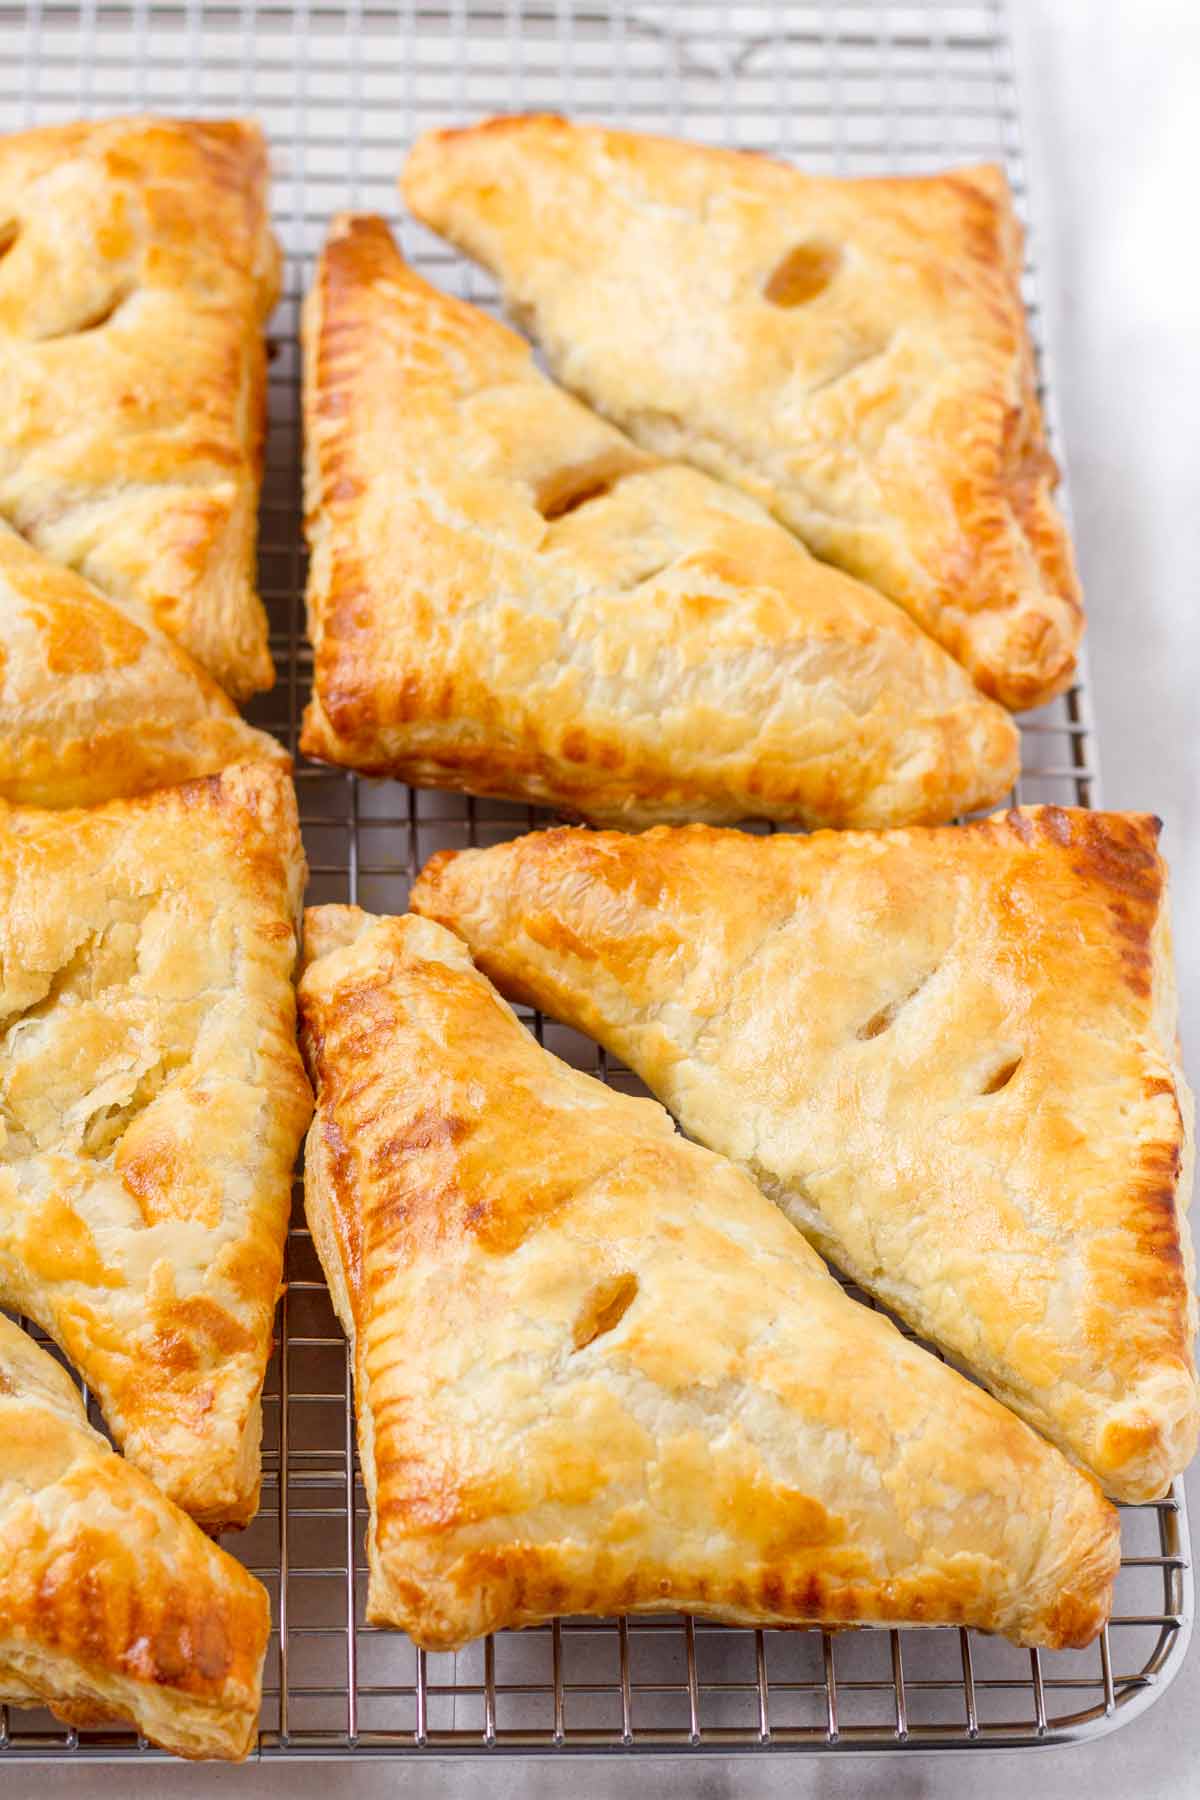 baked golden brown apple turnovers with puff pastry